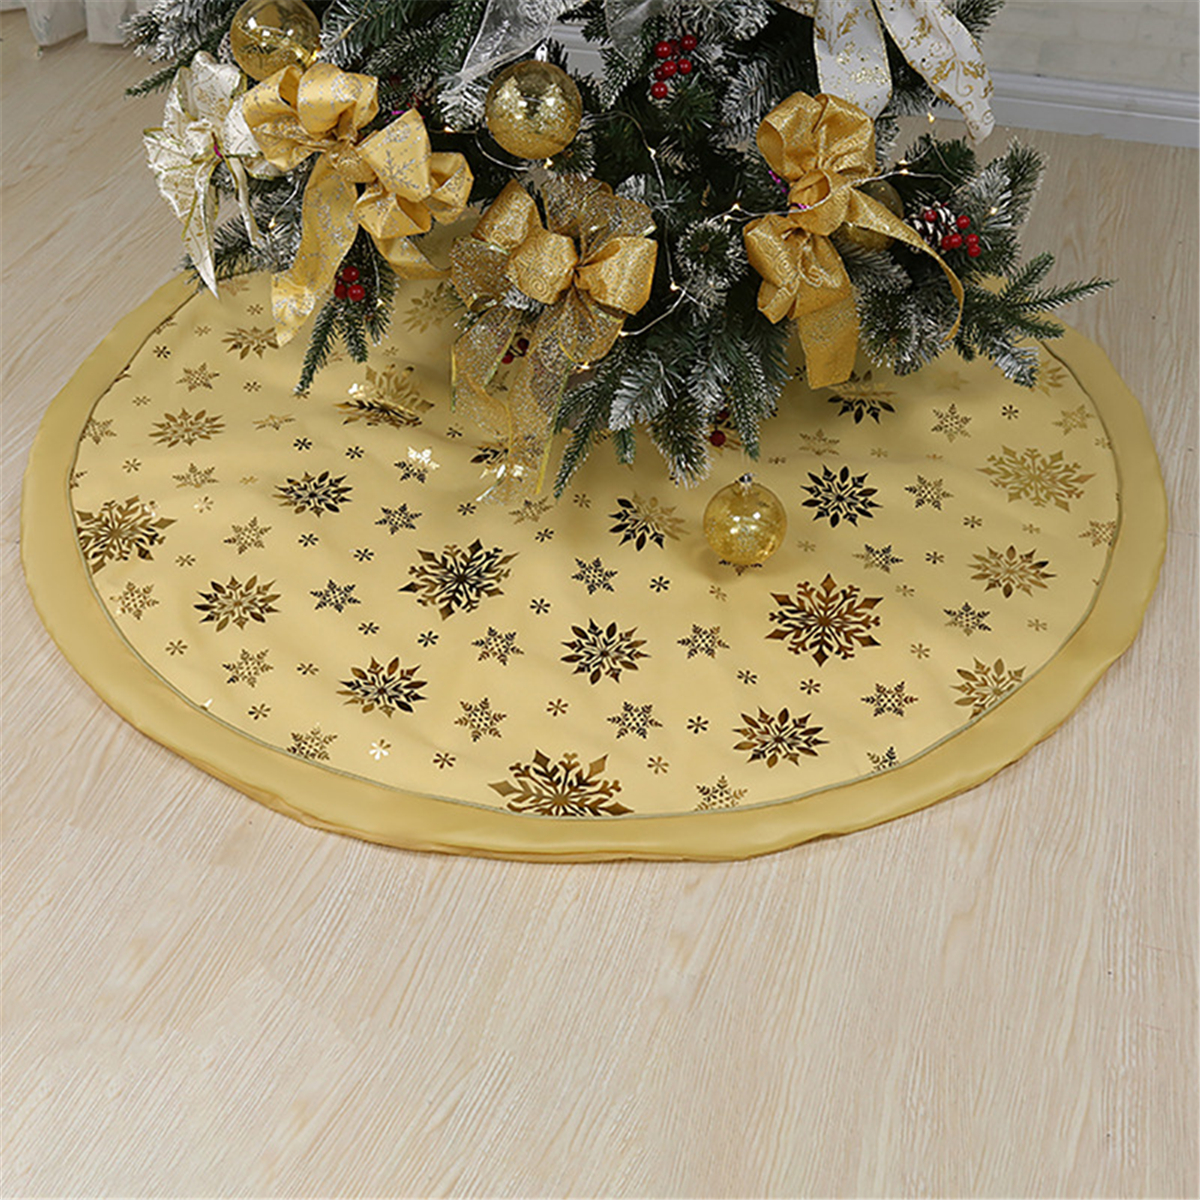 120cm-Stitched-Santa-Christmas-Snowflake-Skir-Tree-Skirt-for-Home-New-Year-2020-Christmas-Fancy-Deco-1770958-6